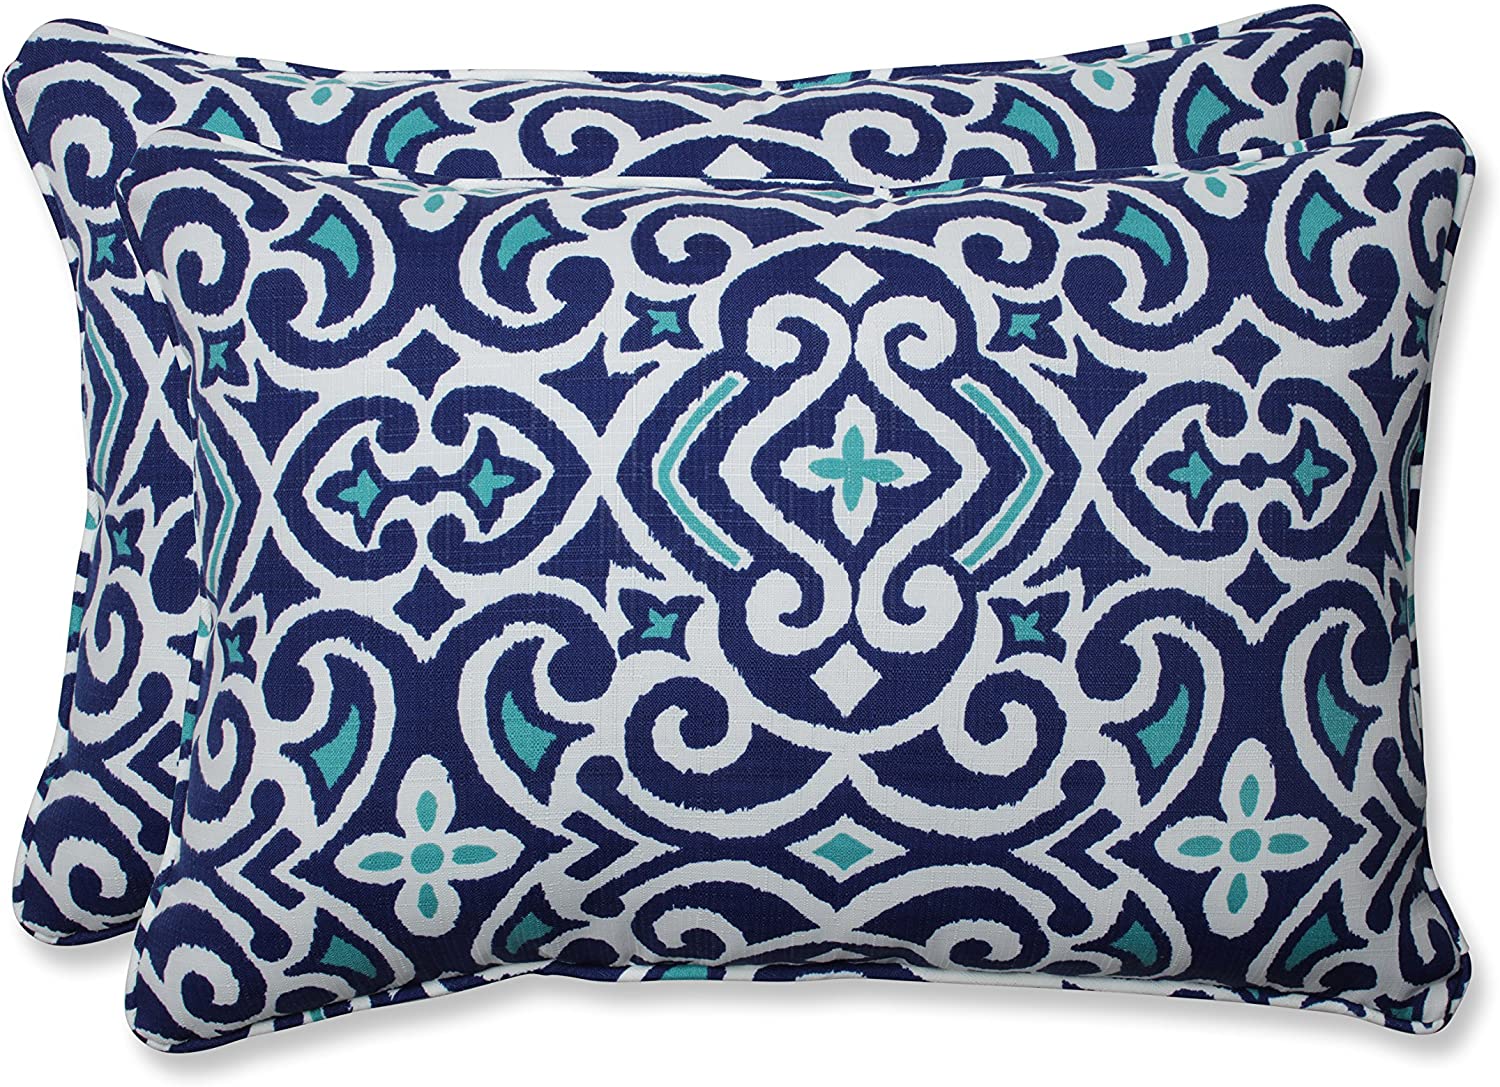 18. Details about   Pillow Perfect Outdoor/Indoor New Damask Marine Square Corner Seat Cushions 